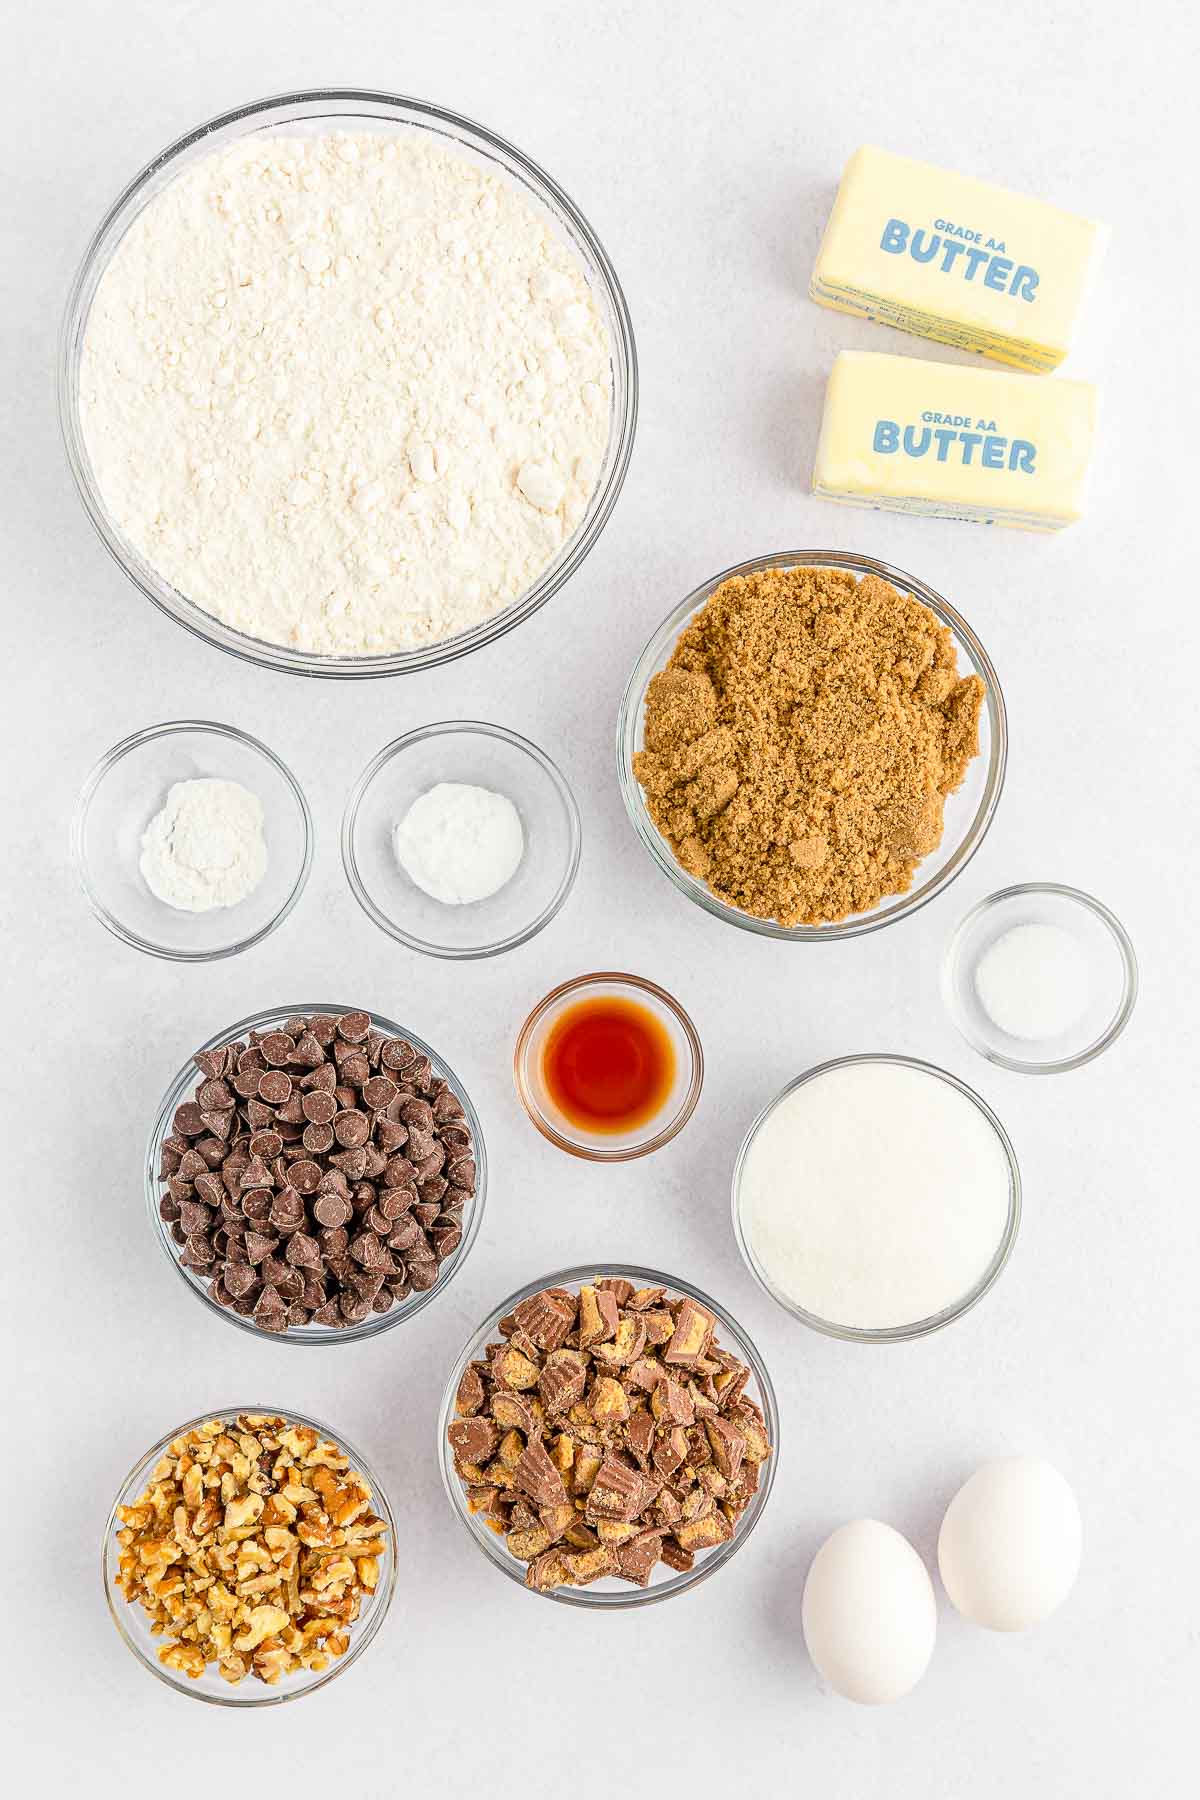 several glass bowls with ingredients for peanut butter cup cookie bars - flour, brown sugar, white sugar, vanilla, eggs, chocolate chips, peanut butter cups and chopped nuts.